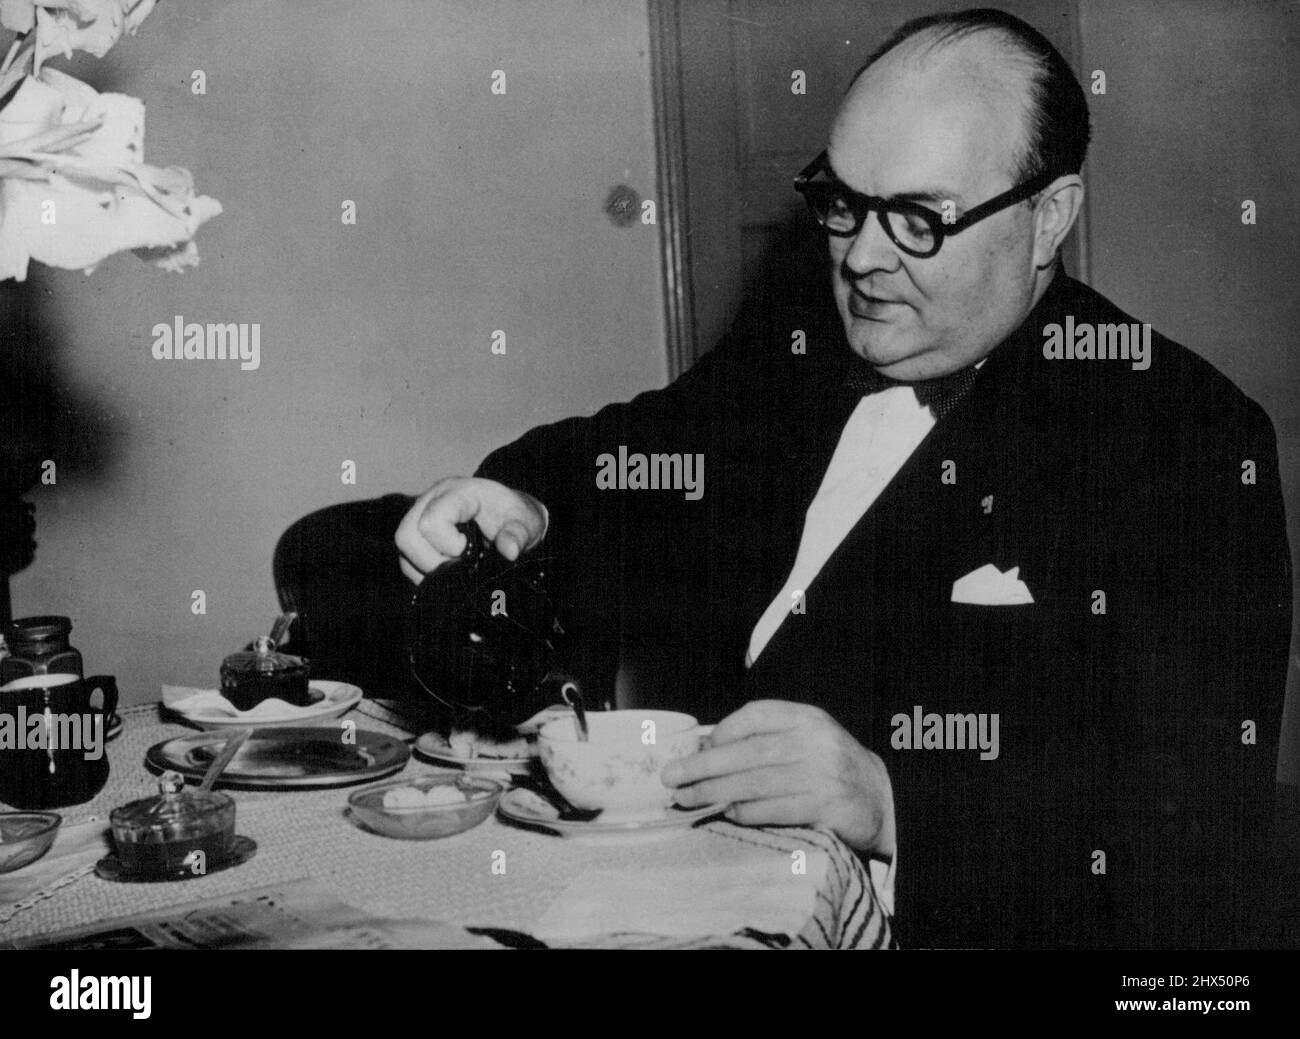 Paul-Henri Spaak - The great Belgian Statement is mentioned as likely successor to Mr. Trygve Lie as Secretary-General of United Nations. April 11, 1950. (Photo by Camera Press). Stock Photo